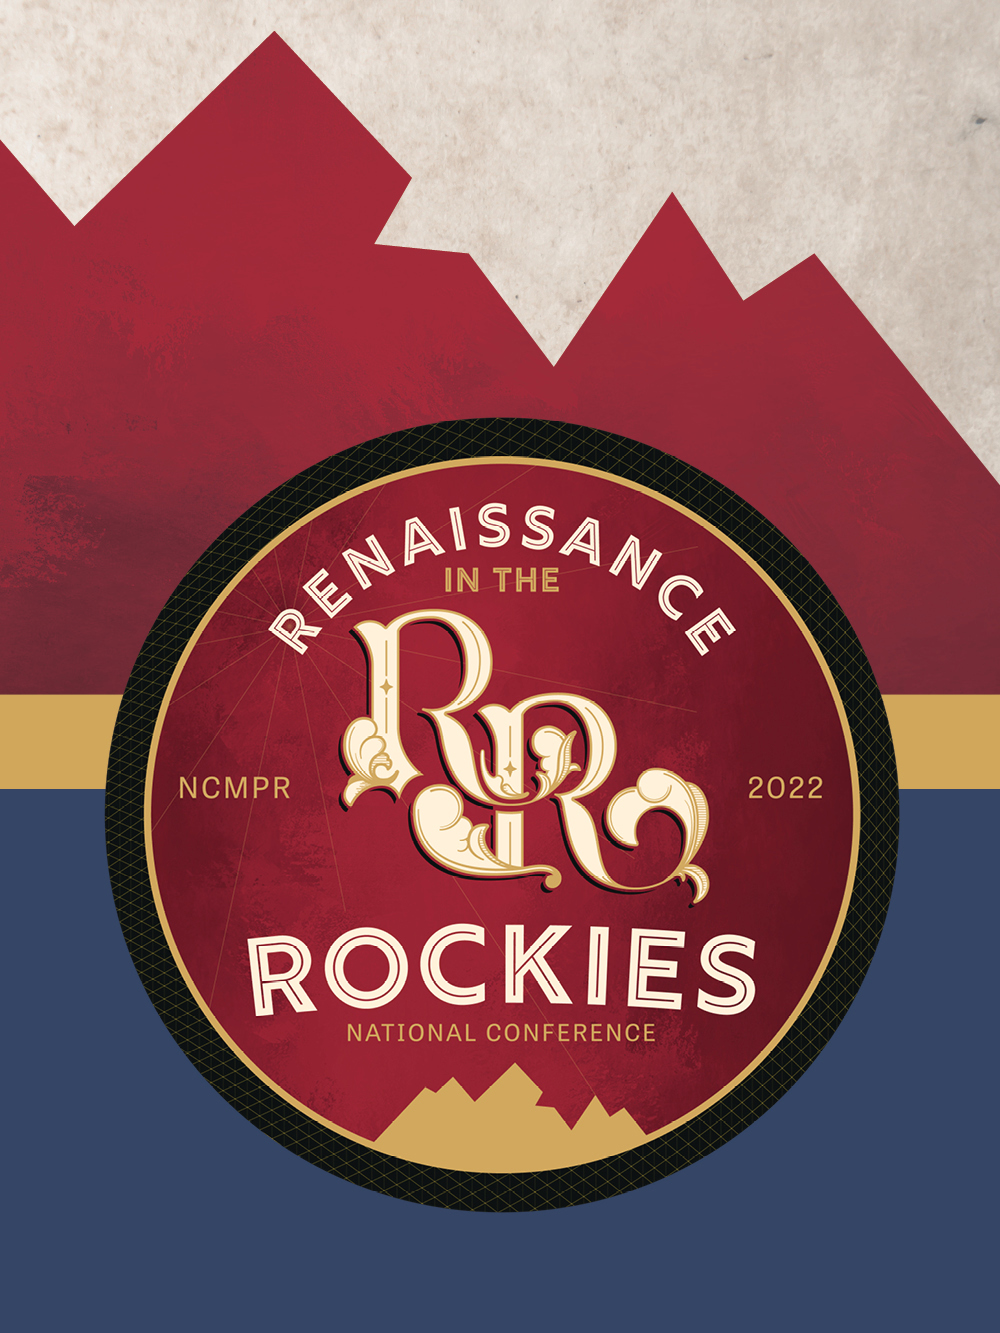 Renaissance in the Rockies